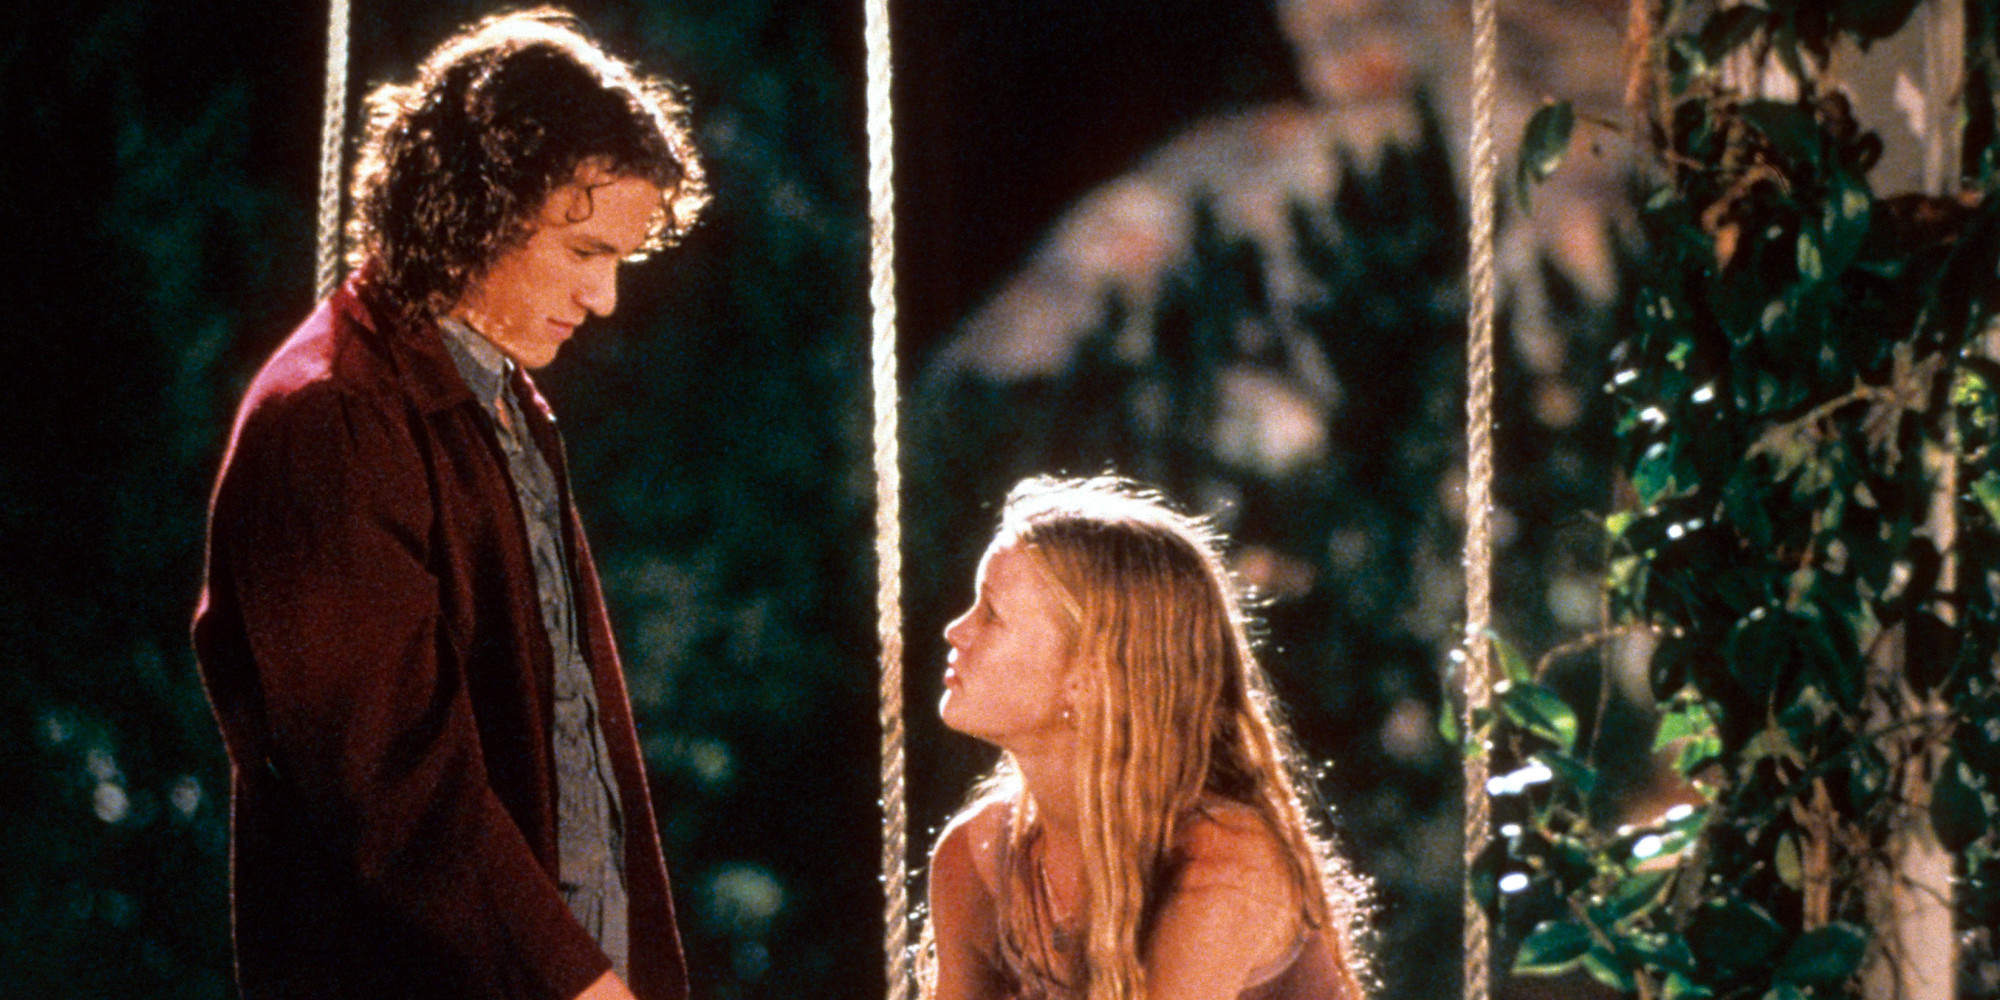 10 Things I Hate About You Soundtrack Music - Complete 